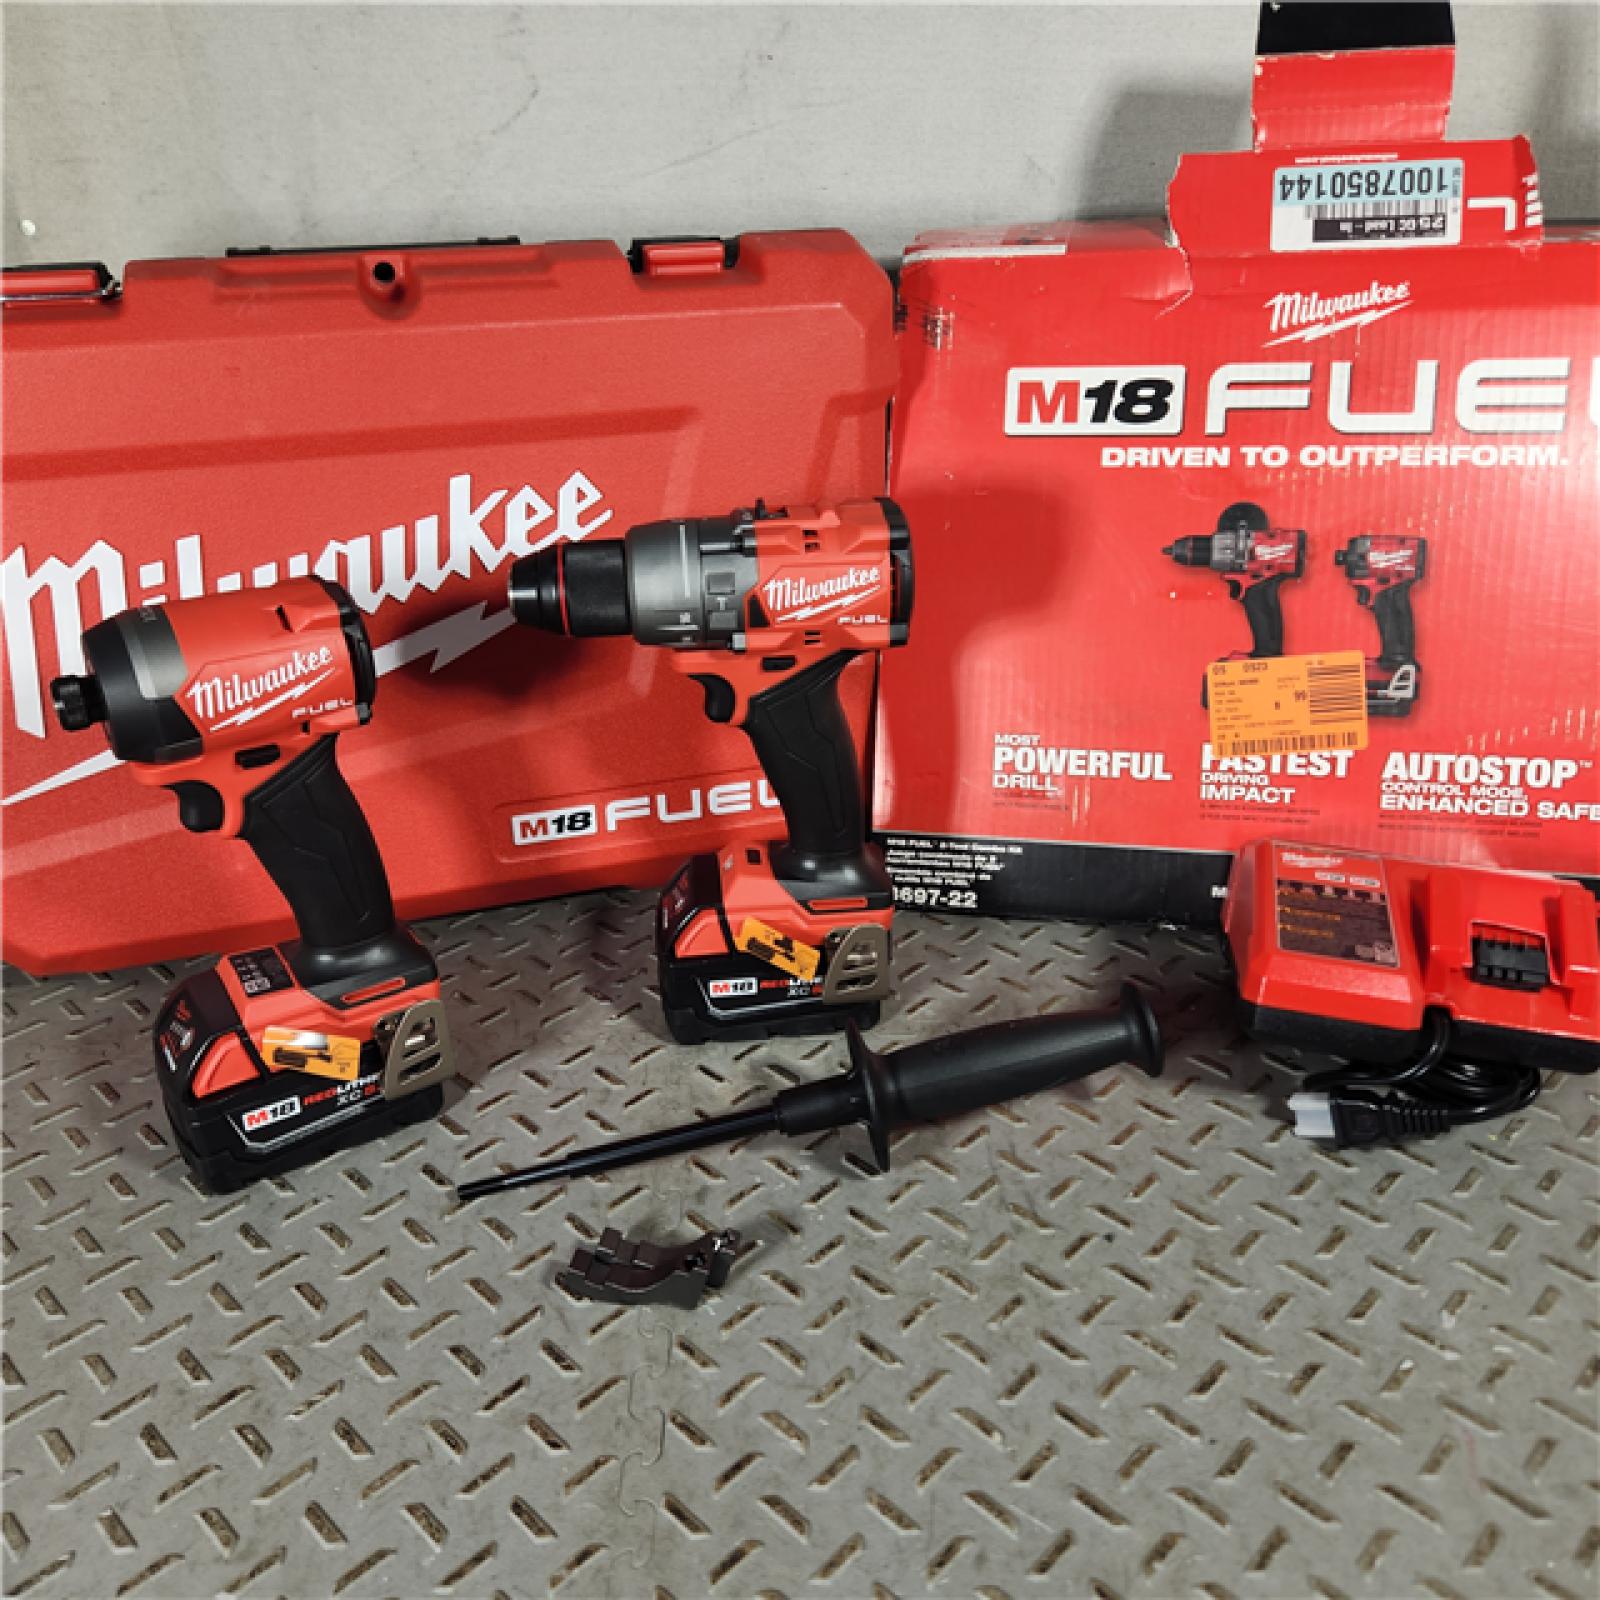 Houston location AS-IS Milwaukee 3697-22 M18 FUEL 1/2 Hammer Driller/Driver &1/4 Hex Impact Driver 2 Tool Combo Kit Appears in new condition